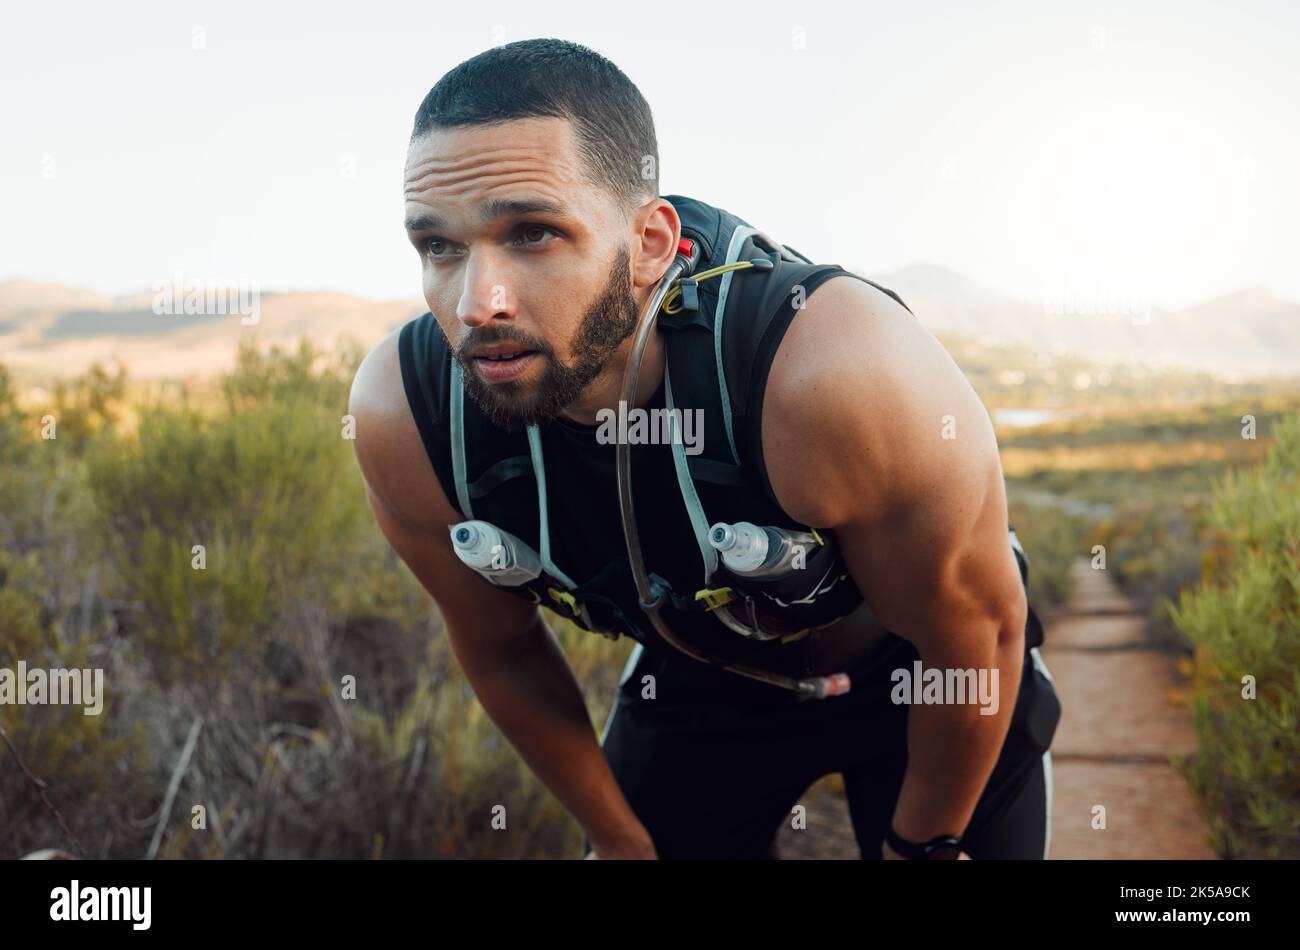 Sweating, breathing and tired fitness man running outdoors with fatigue, body challenge and struggle for exercise. Male runner athlete, mental break Stock Photo